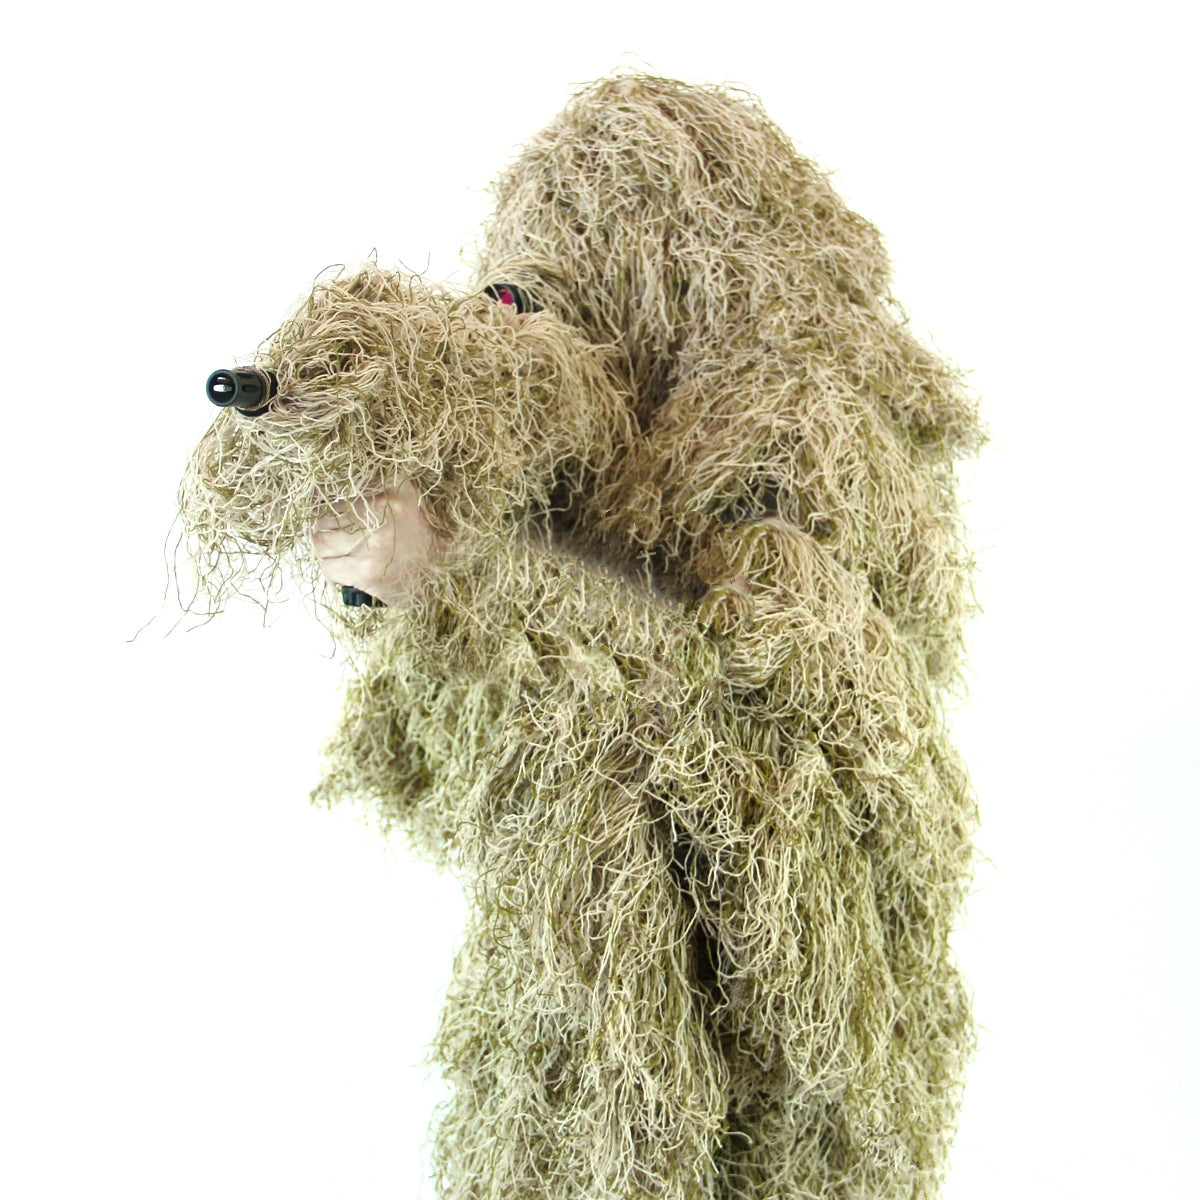 Arcturus Dry Grass Ghost Ghillie Suit - Includes Matching Rifle Wrap